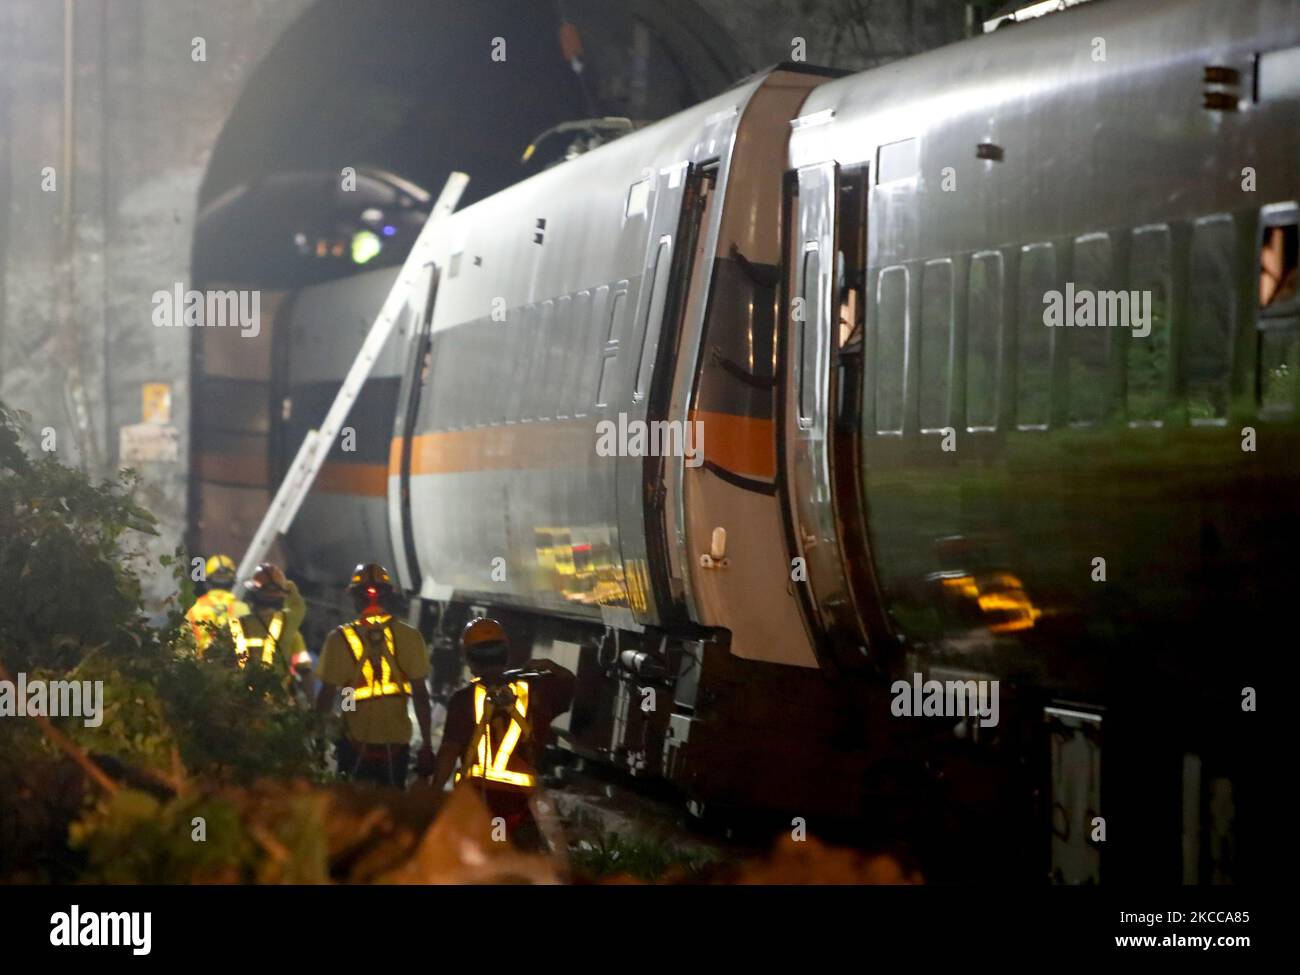 Police officers remove belongings from and conduct investigations at a scene where a train carrying 490 people has been derailed, in Hualien, Taiwan 3 April 2021. The accident has killed at least 50 people, injured dozens and severely damaged the railway. (Photo by Ceng Shou Yi/NurPhoto) Stock Photo